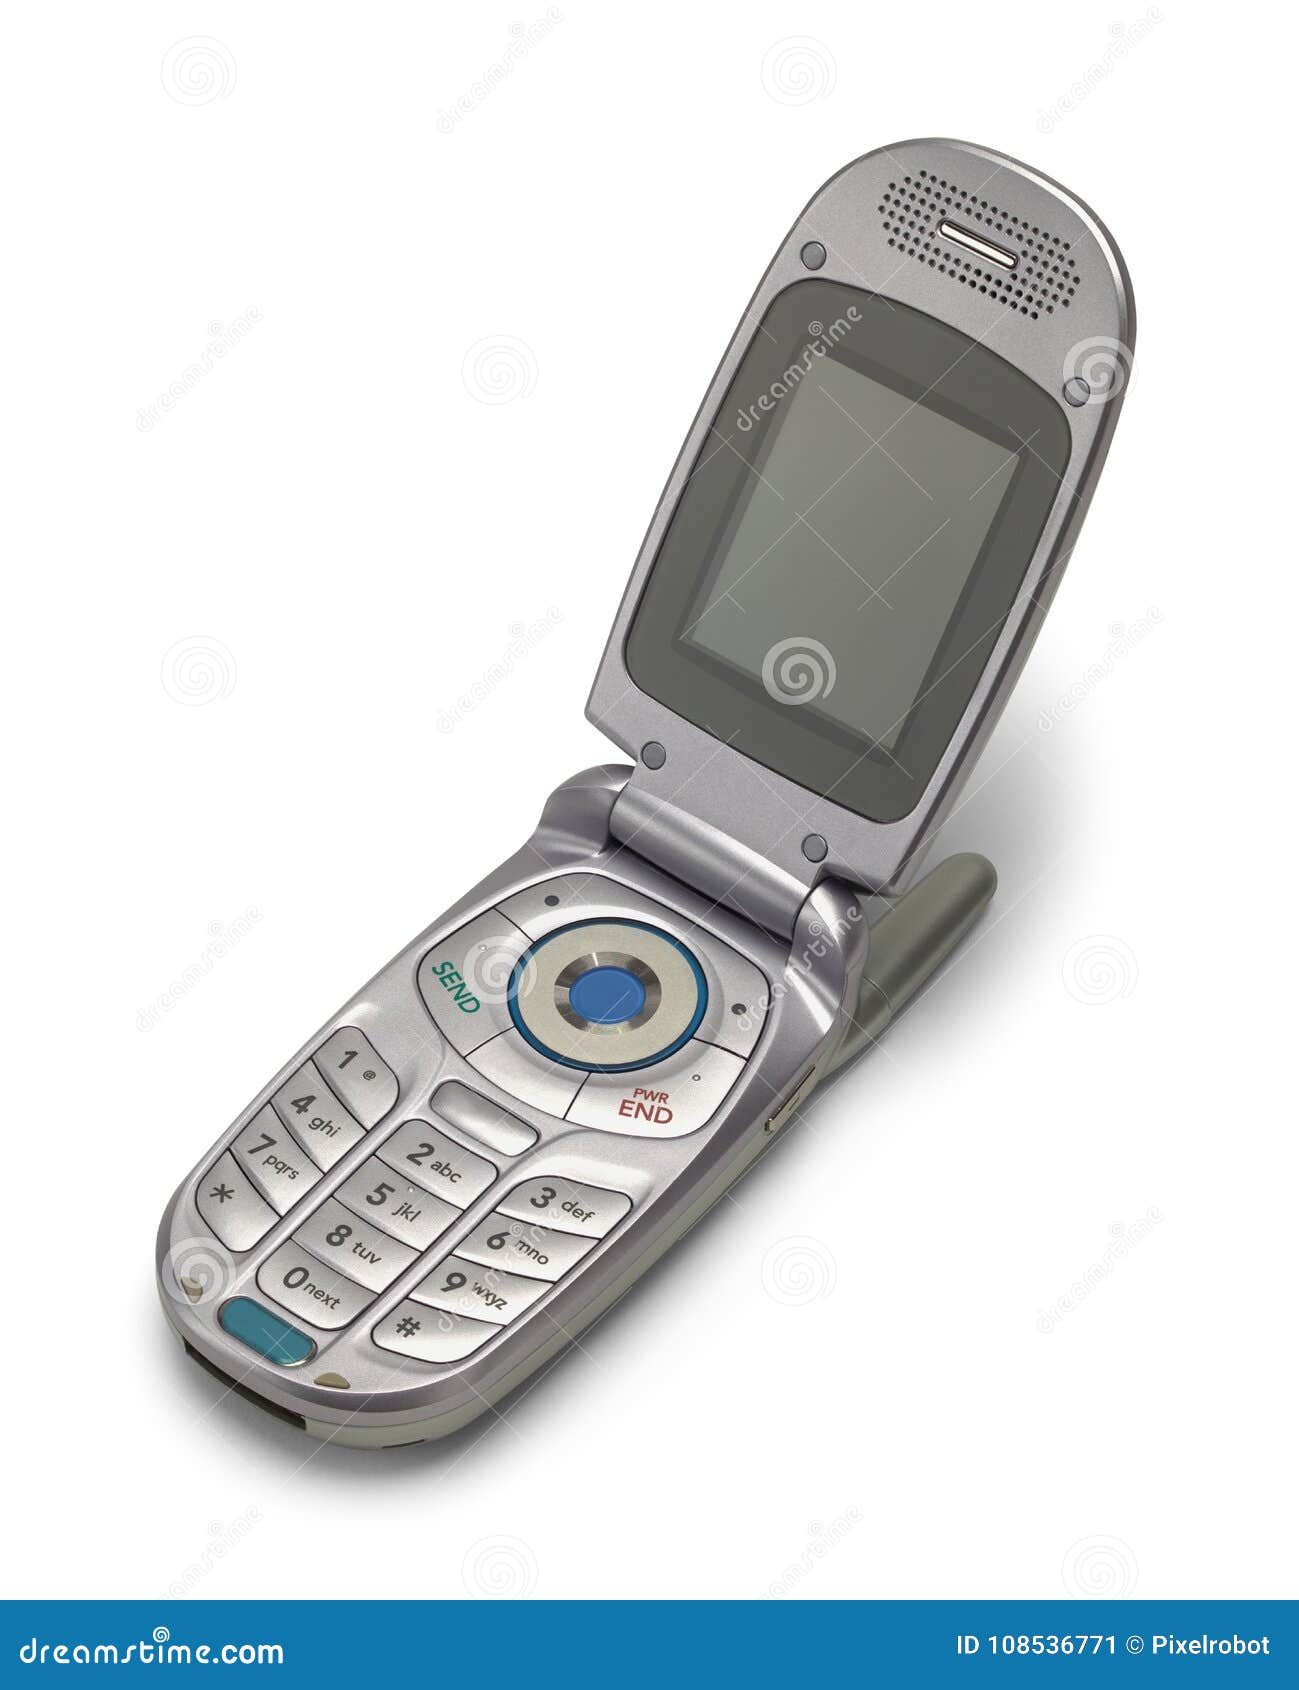 Open Flip Phone stock image. Image of background, space - 108536771